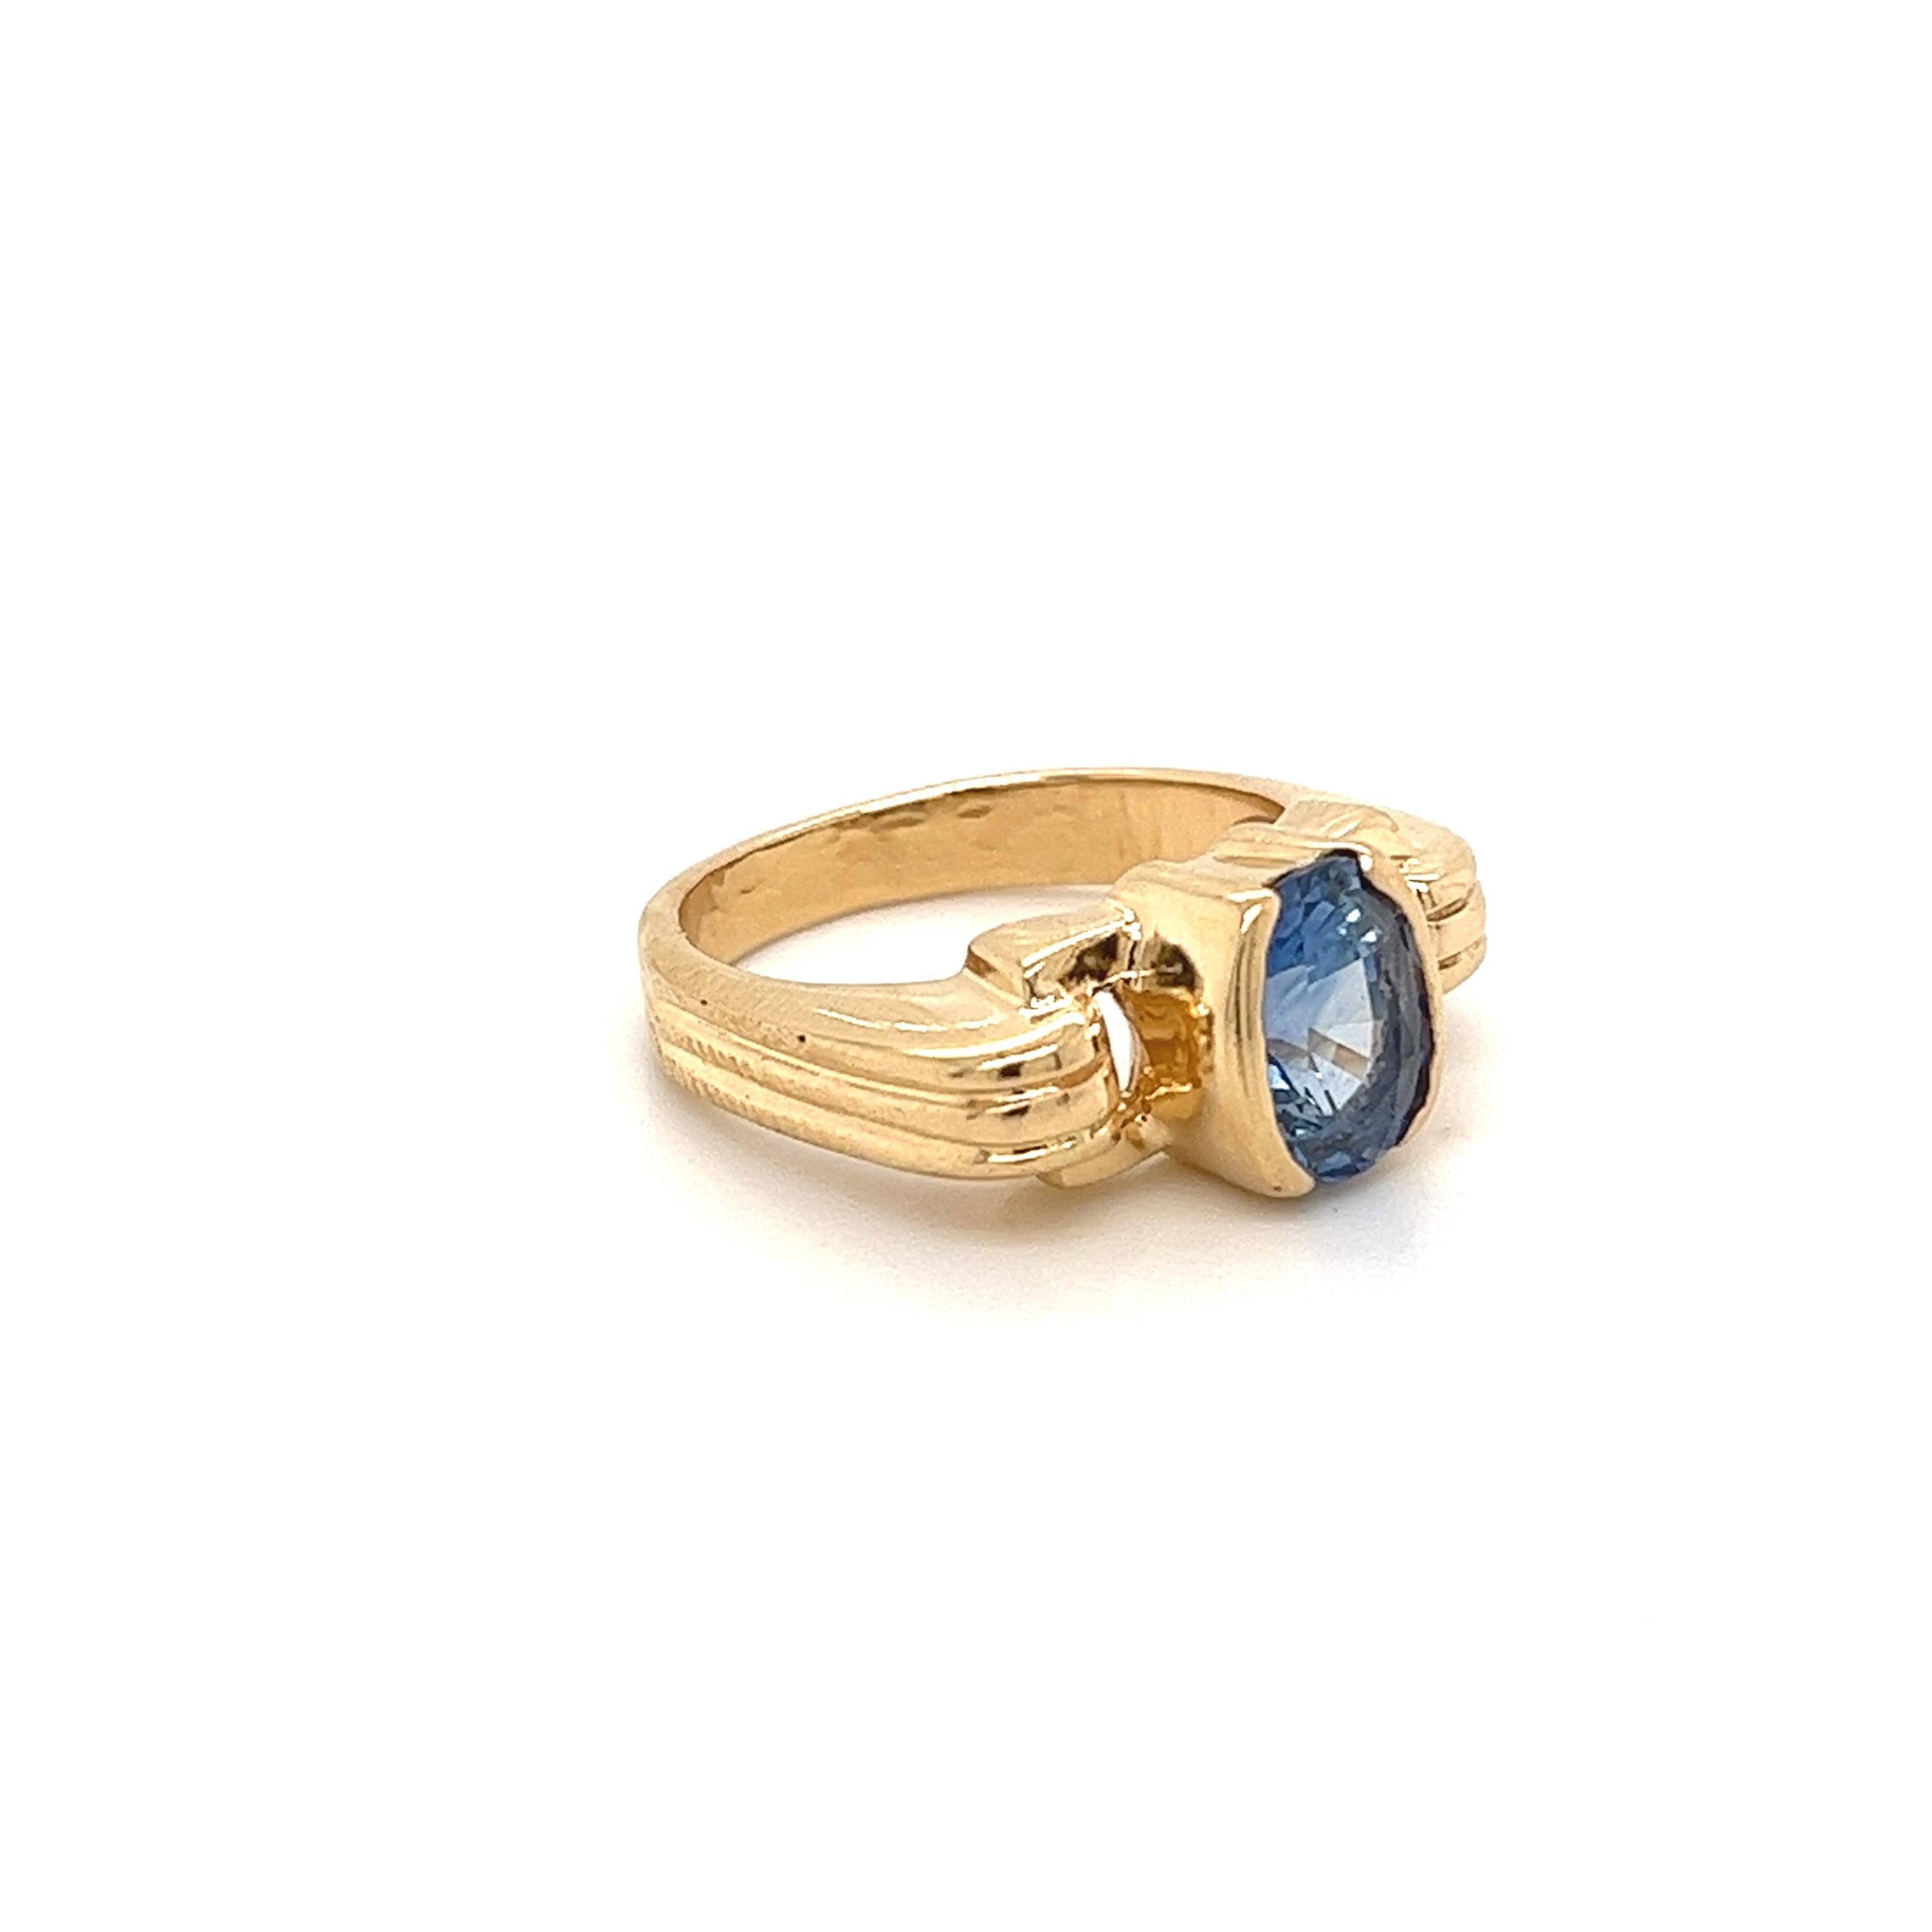 Oval cut Blue Sapphire mounted in a half bezel yellow gold setting. The Sapphire center stone bears excellent luster and a vibrant deep blue color hue. The art deco-inspired ring setting is made in 14k solid gold. 

Ring Details:
✔ Metal: 14k gold